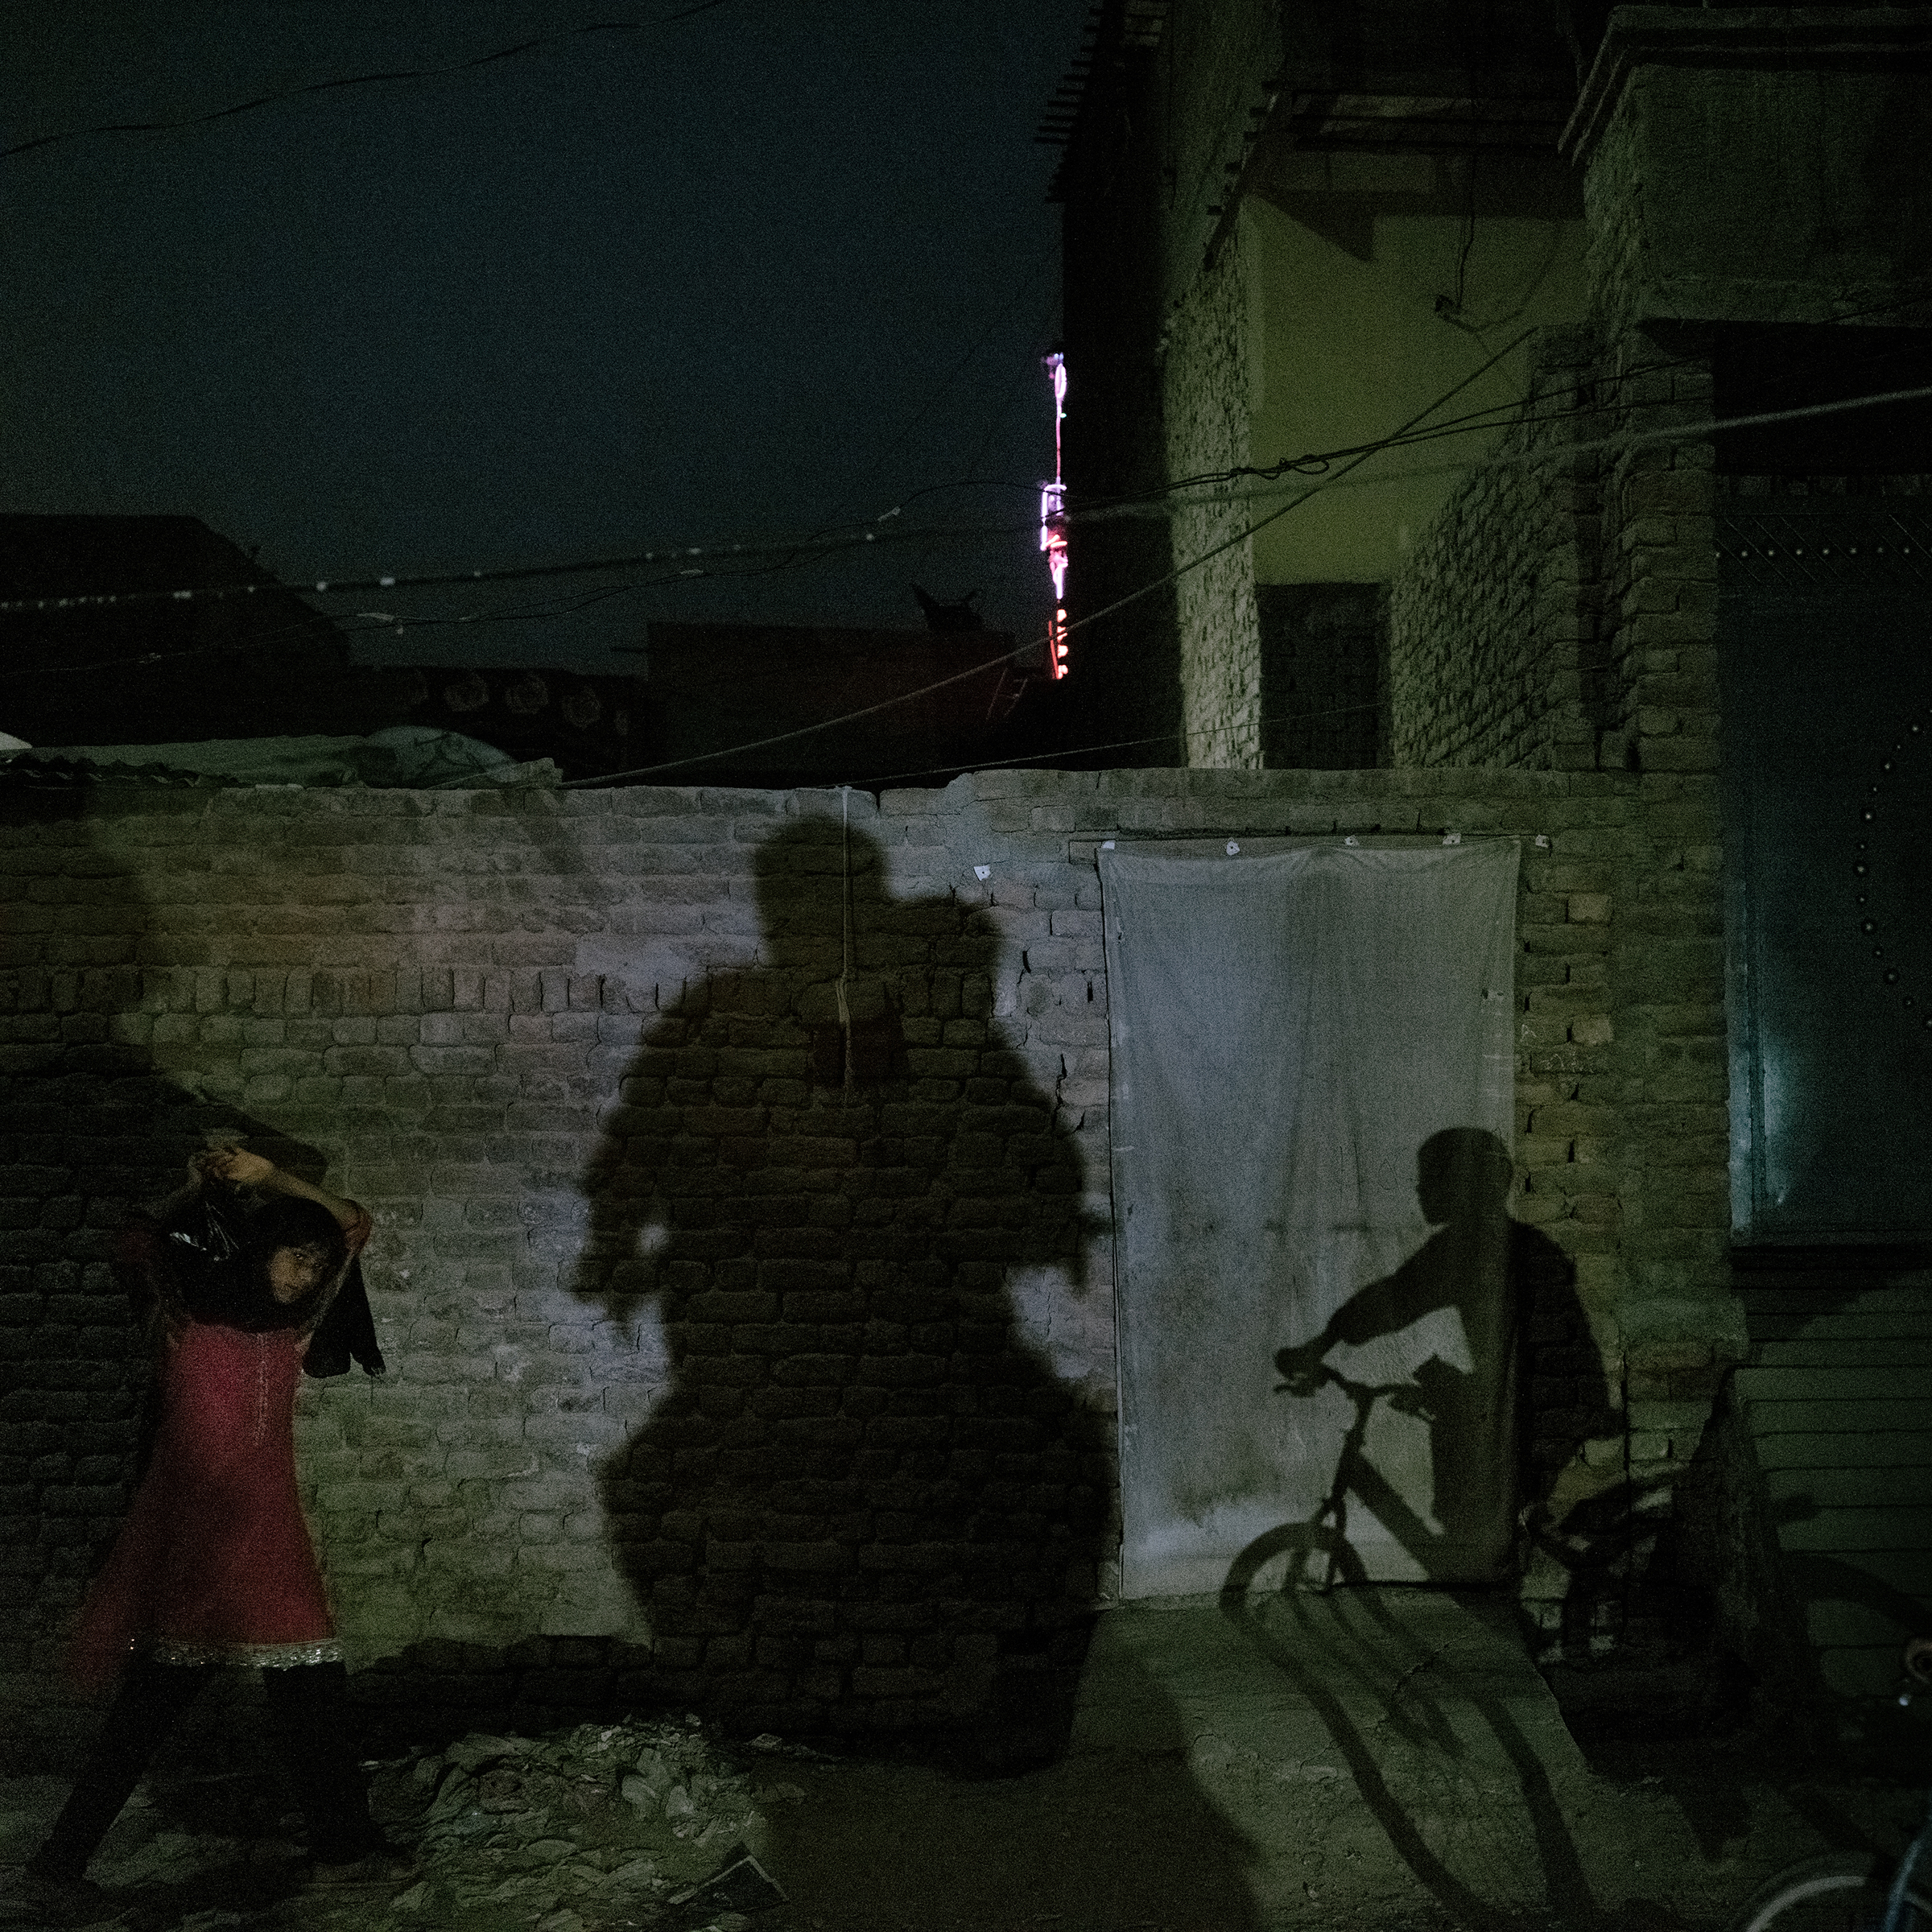 A range of activities happens at night in Jacobabad on June 27: a girl returns home with groceries; a boy rides a bicycle; and a father and son ride home on a motorcycle. (Matthieu Paley for TIME)